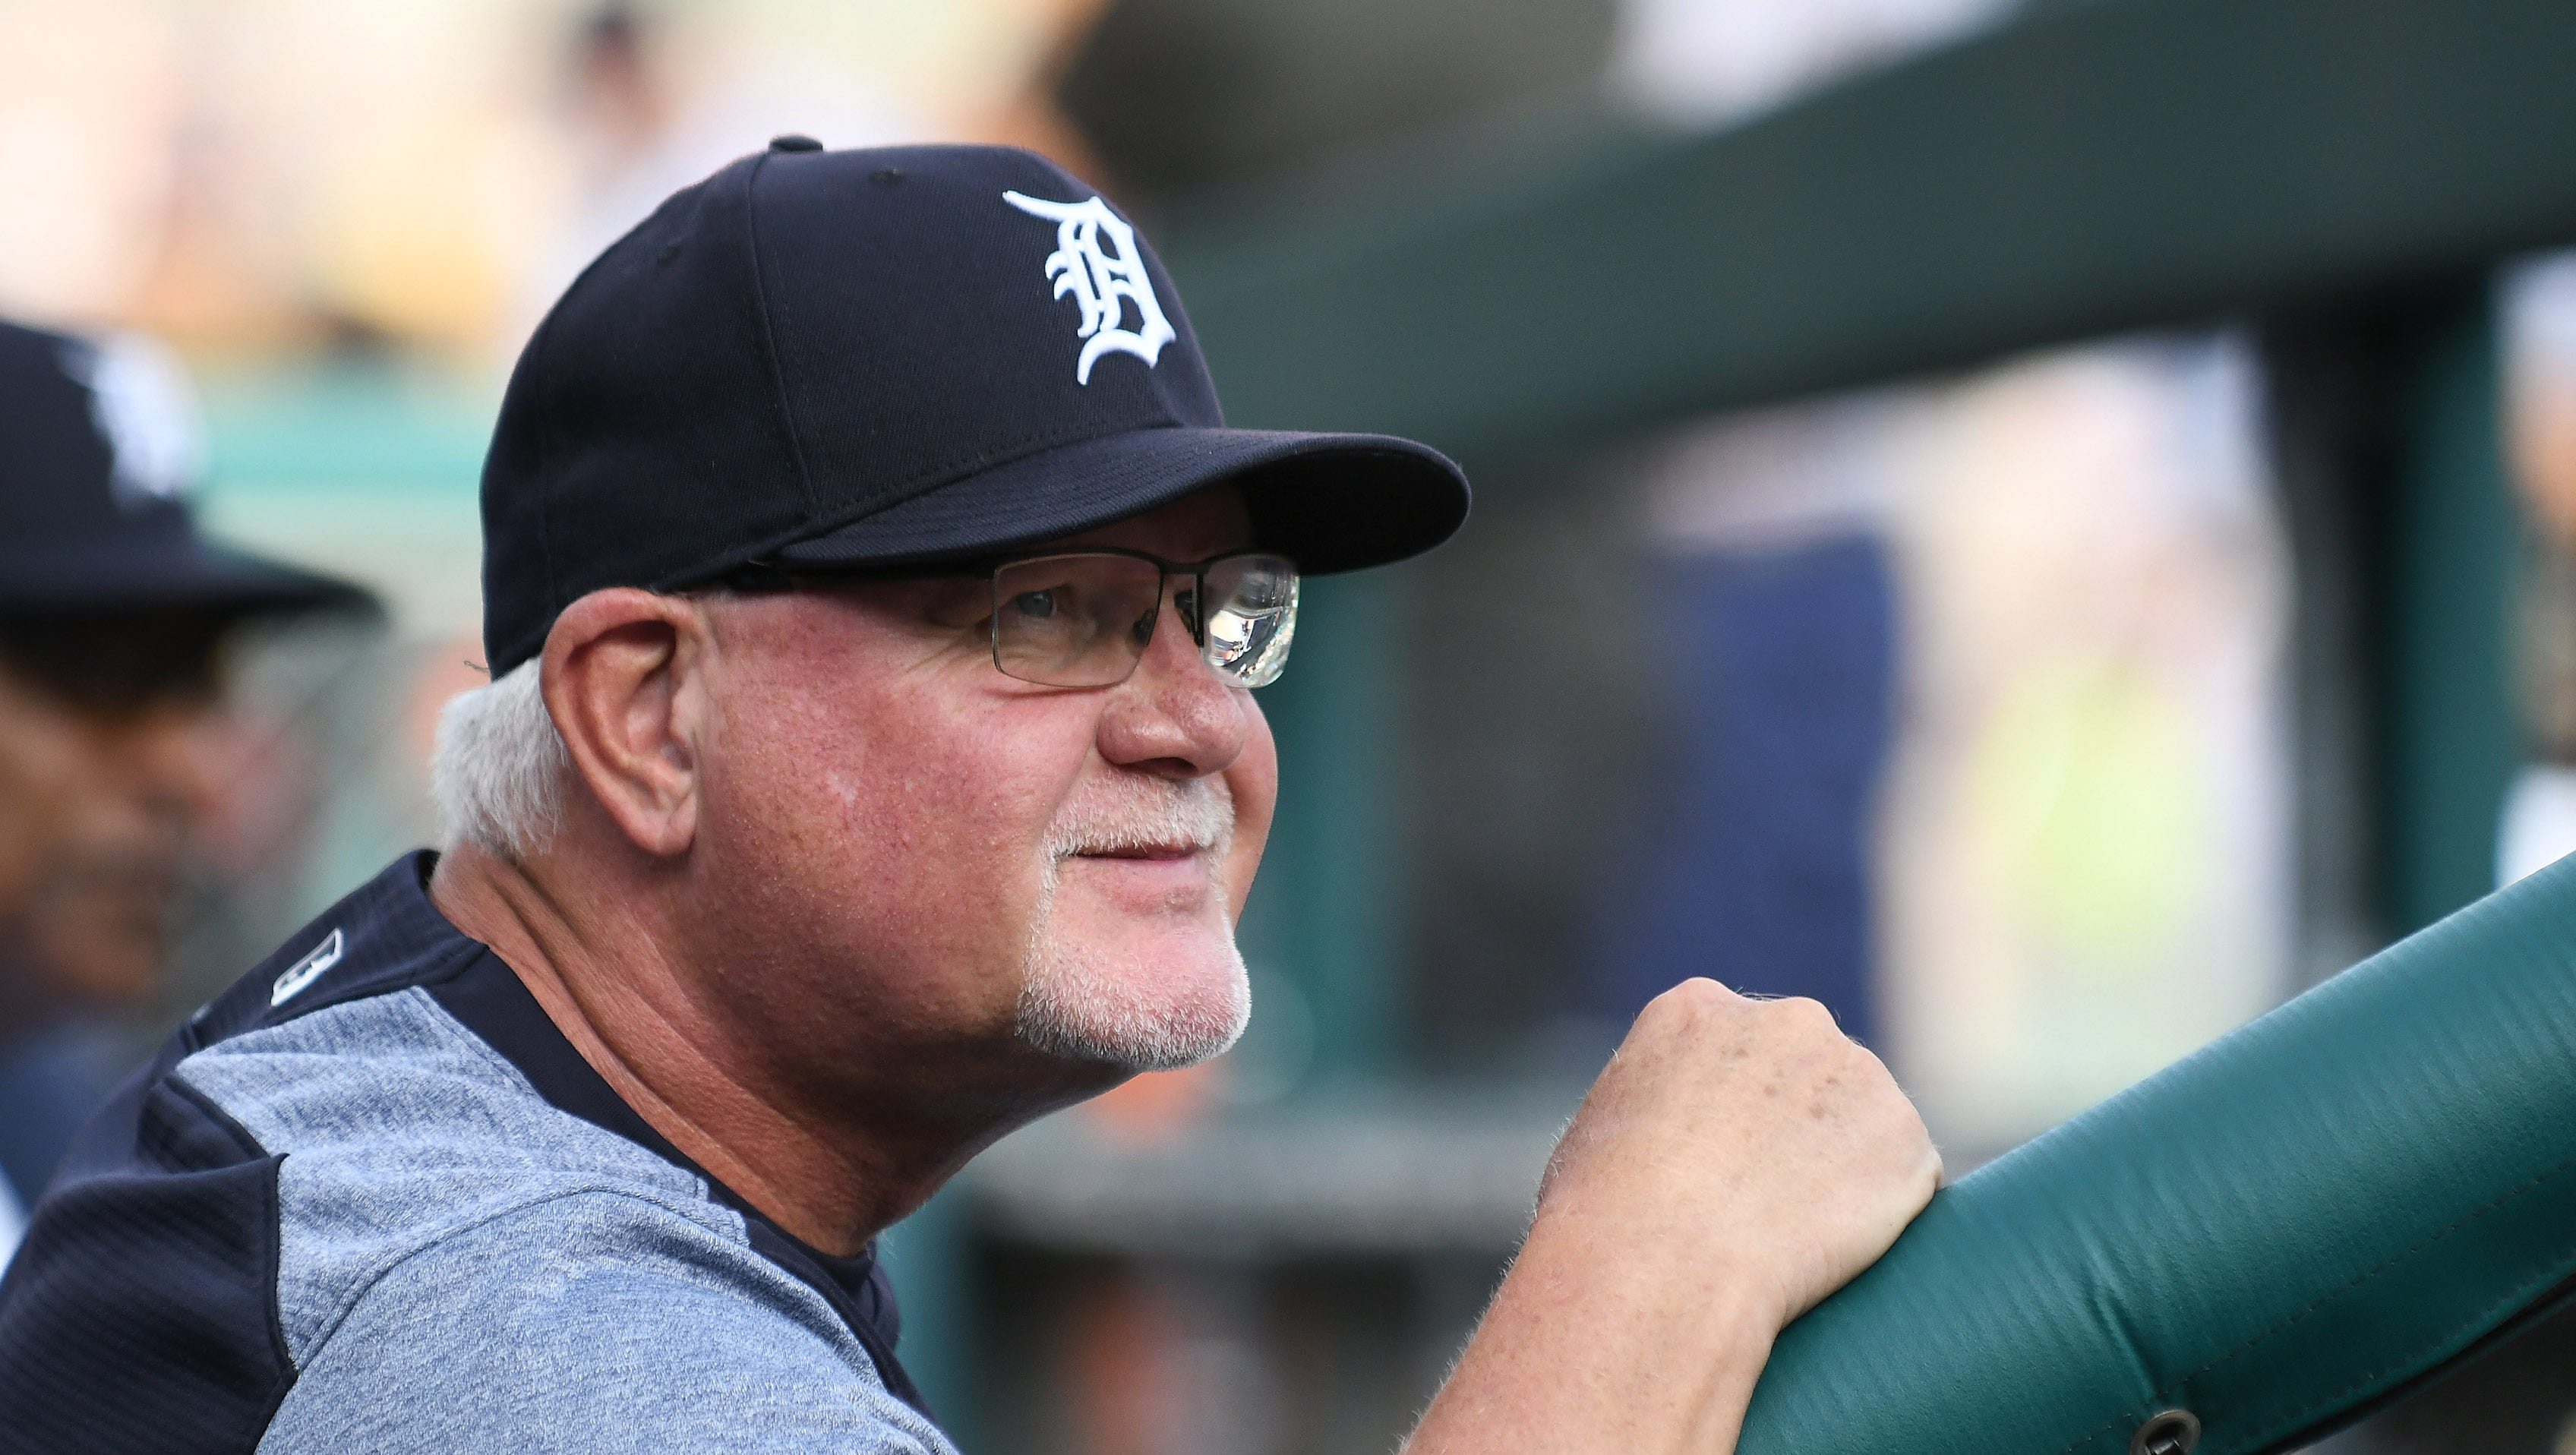 It doesn’t matter to Gardenhire if you are the highest-paid player on the team or the lowest, a grizzled veteran or a fresh-faced rookie, if you don’t respect the game, you are going to hear about it.